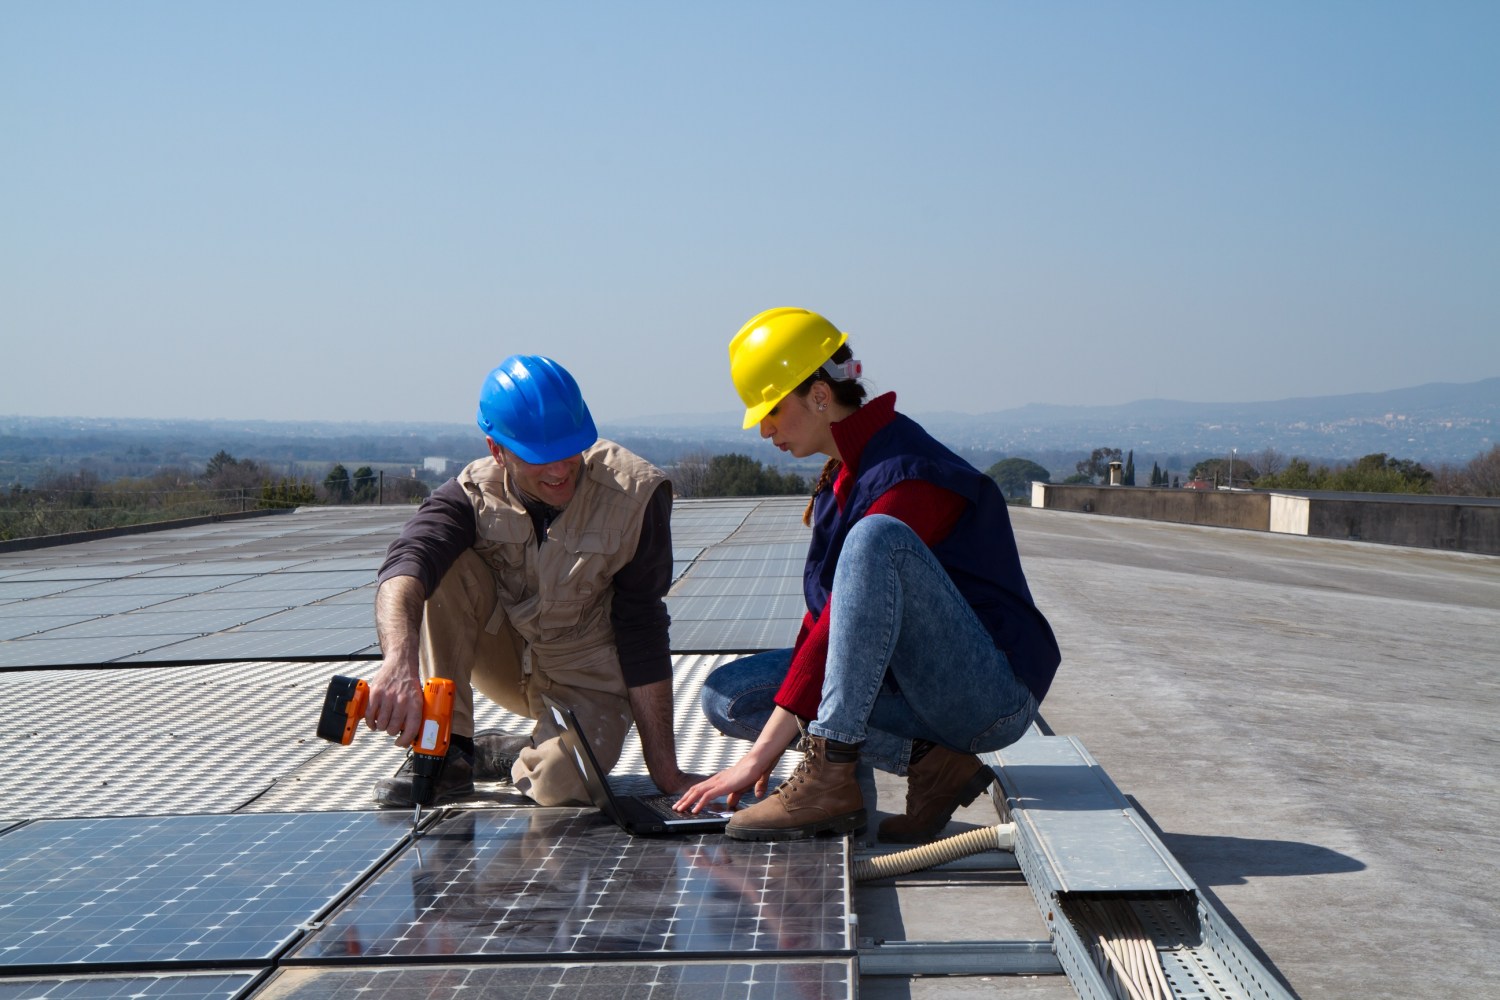 Two clean economy workers installing solar panels